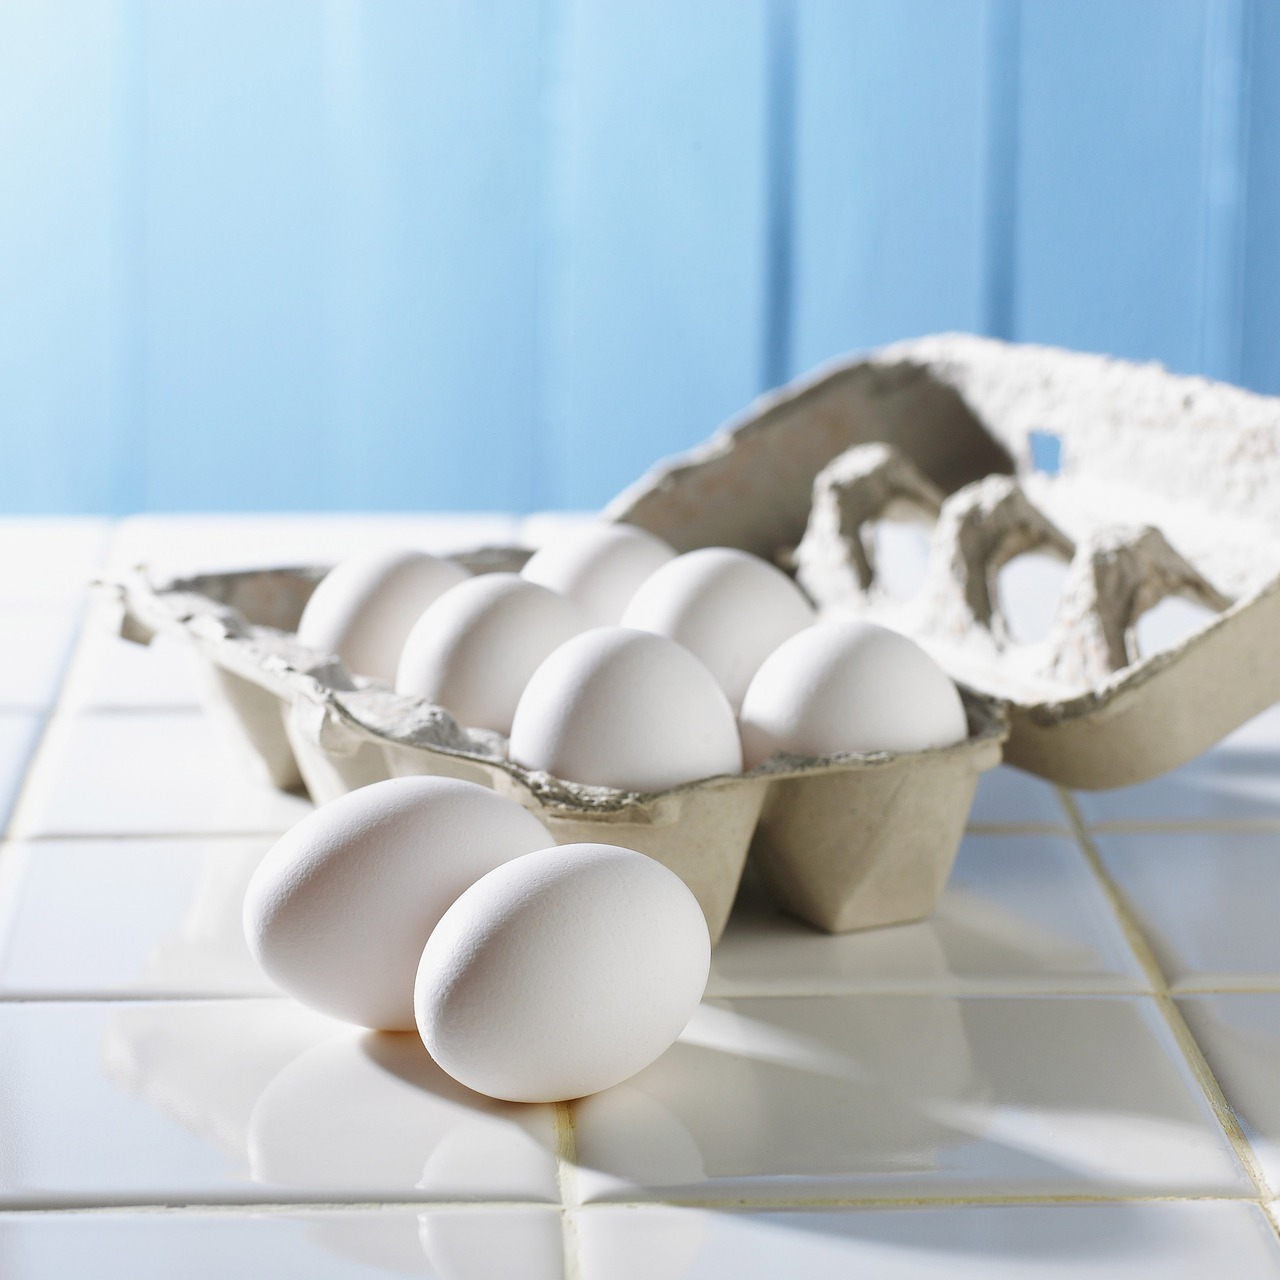 a carton of eggs sitting on top of a tiled floor, shutterstock, great light and shadows”, close-up product photo